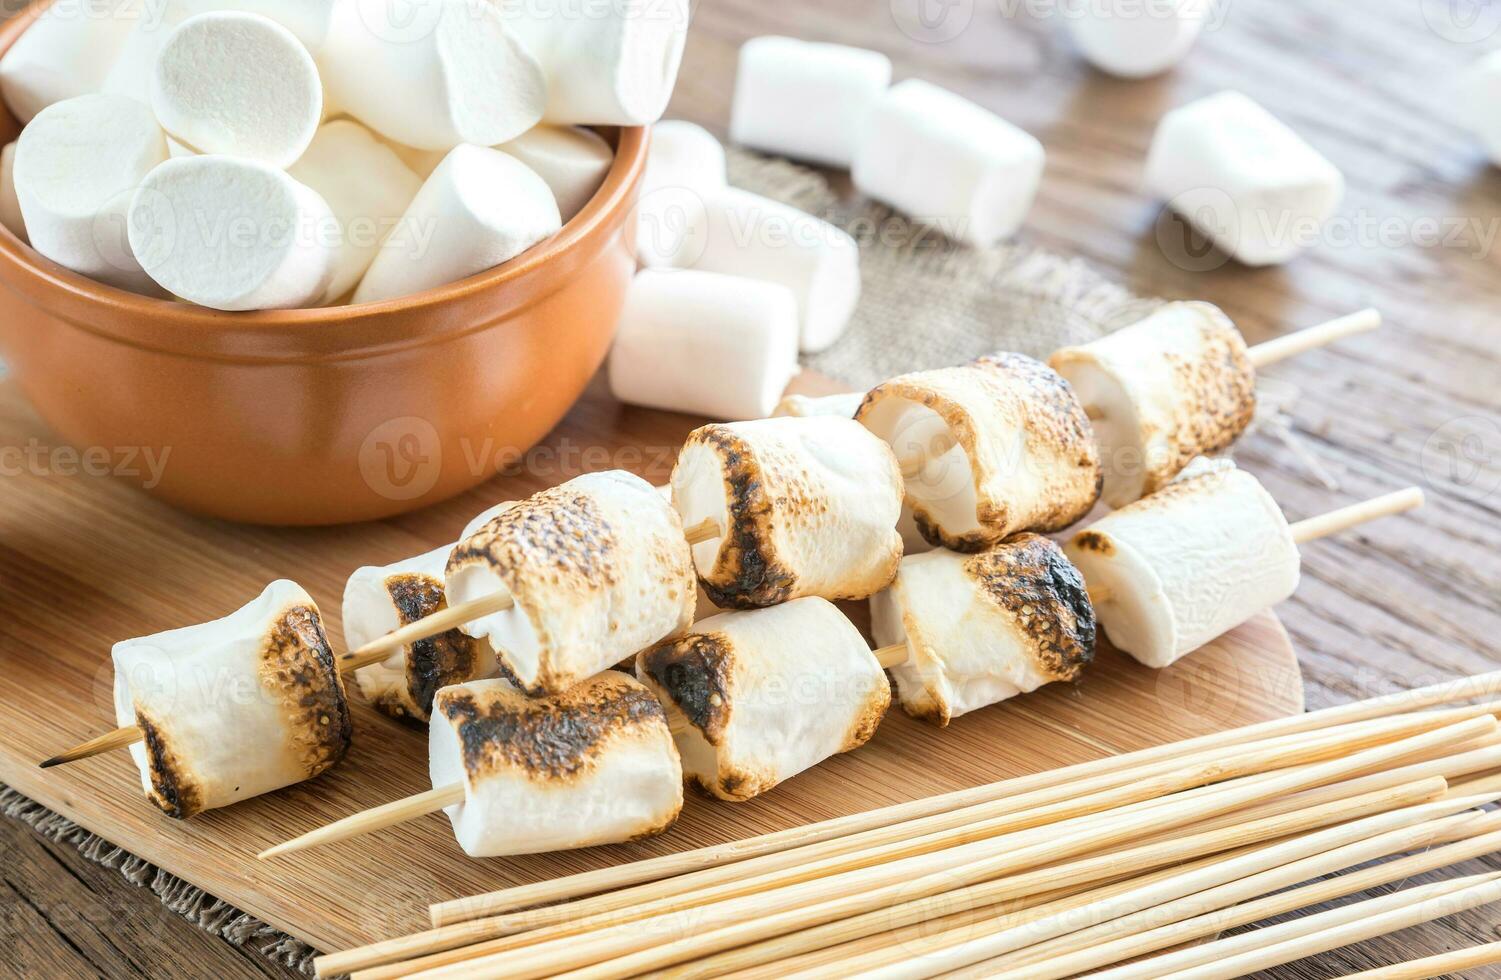 Marshmallow skewers on the wooden board photo